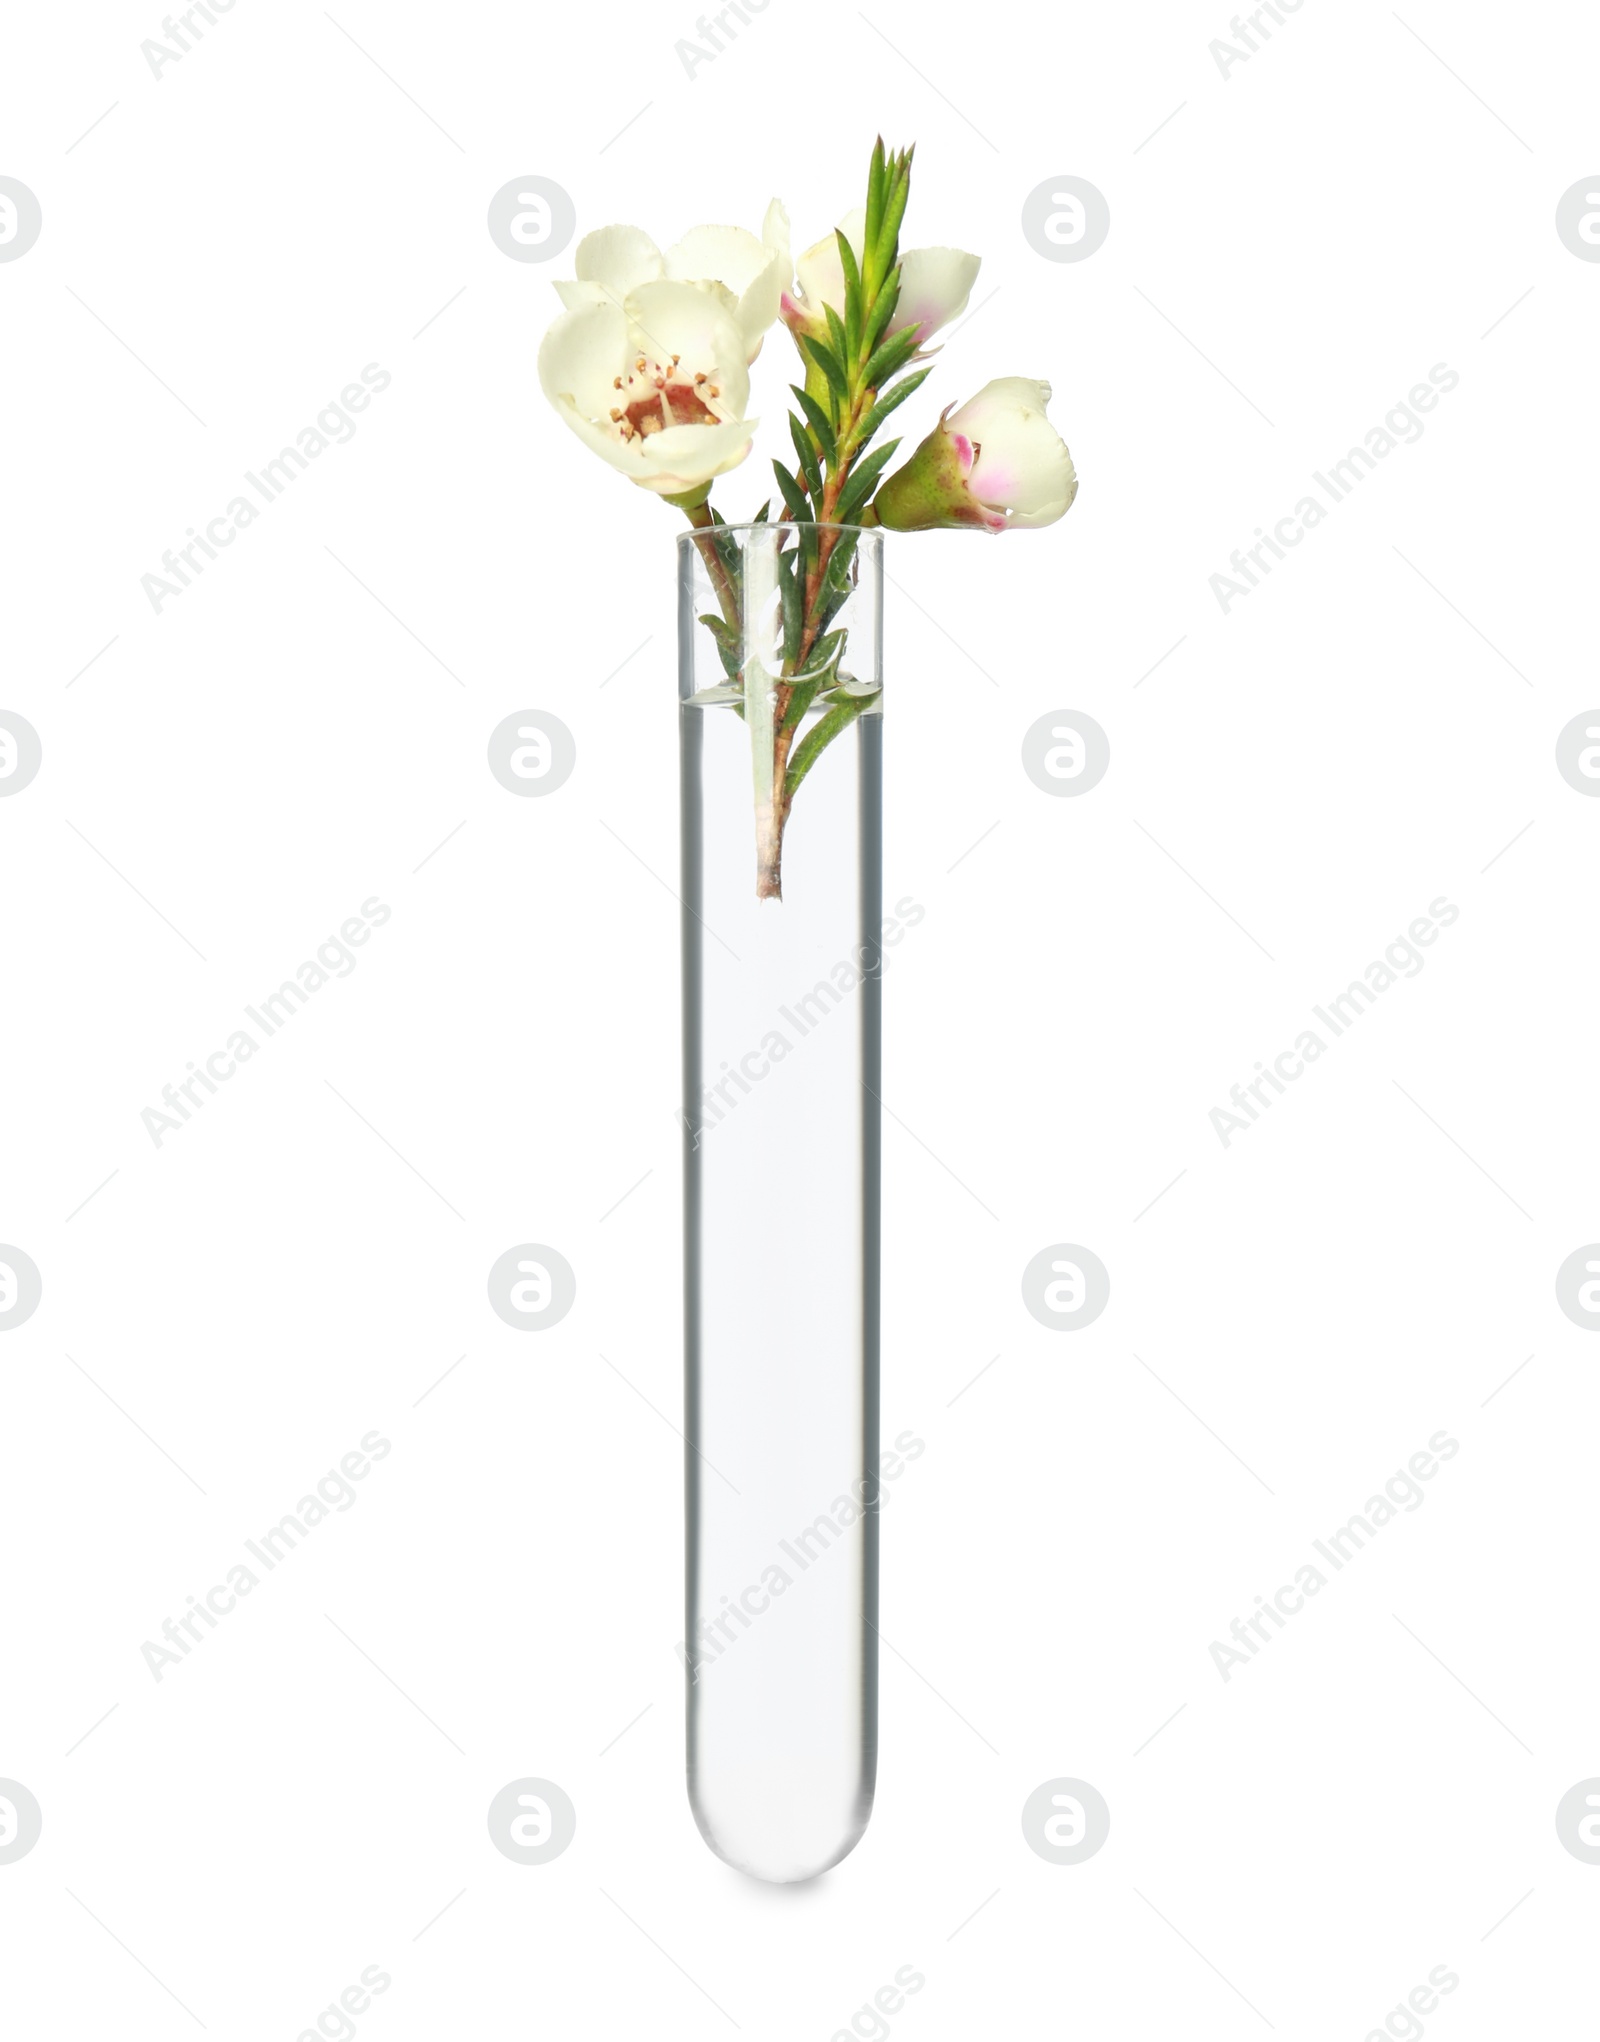 Photo of Chamelaucium flowers in test tube on white background